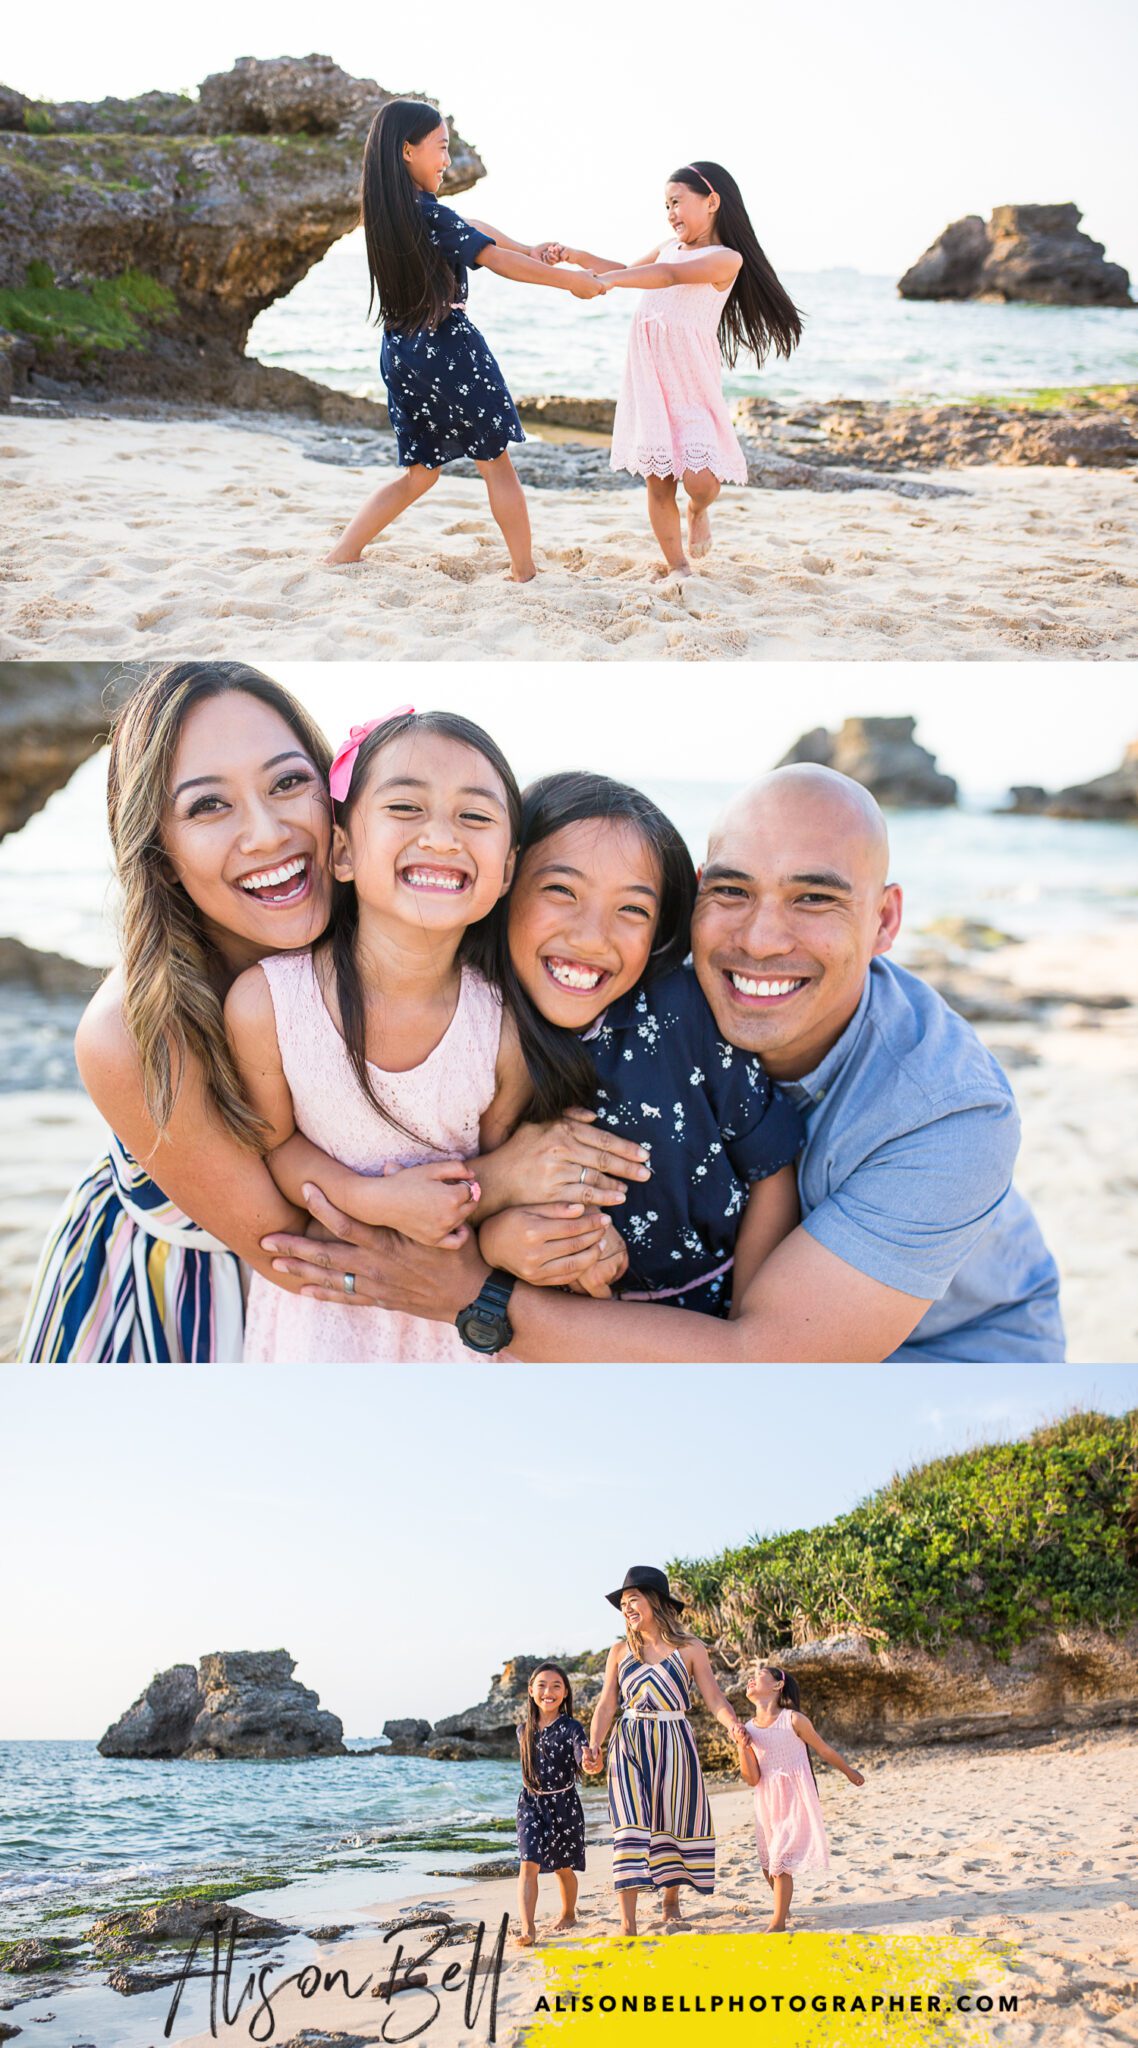 Oahu photographer mini session in hawaii by alison bell photographer